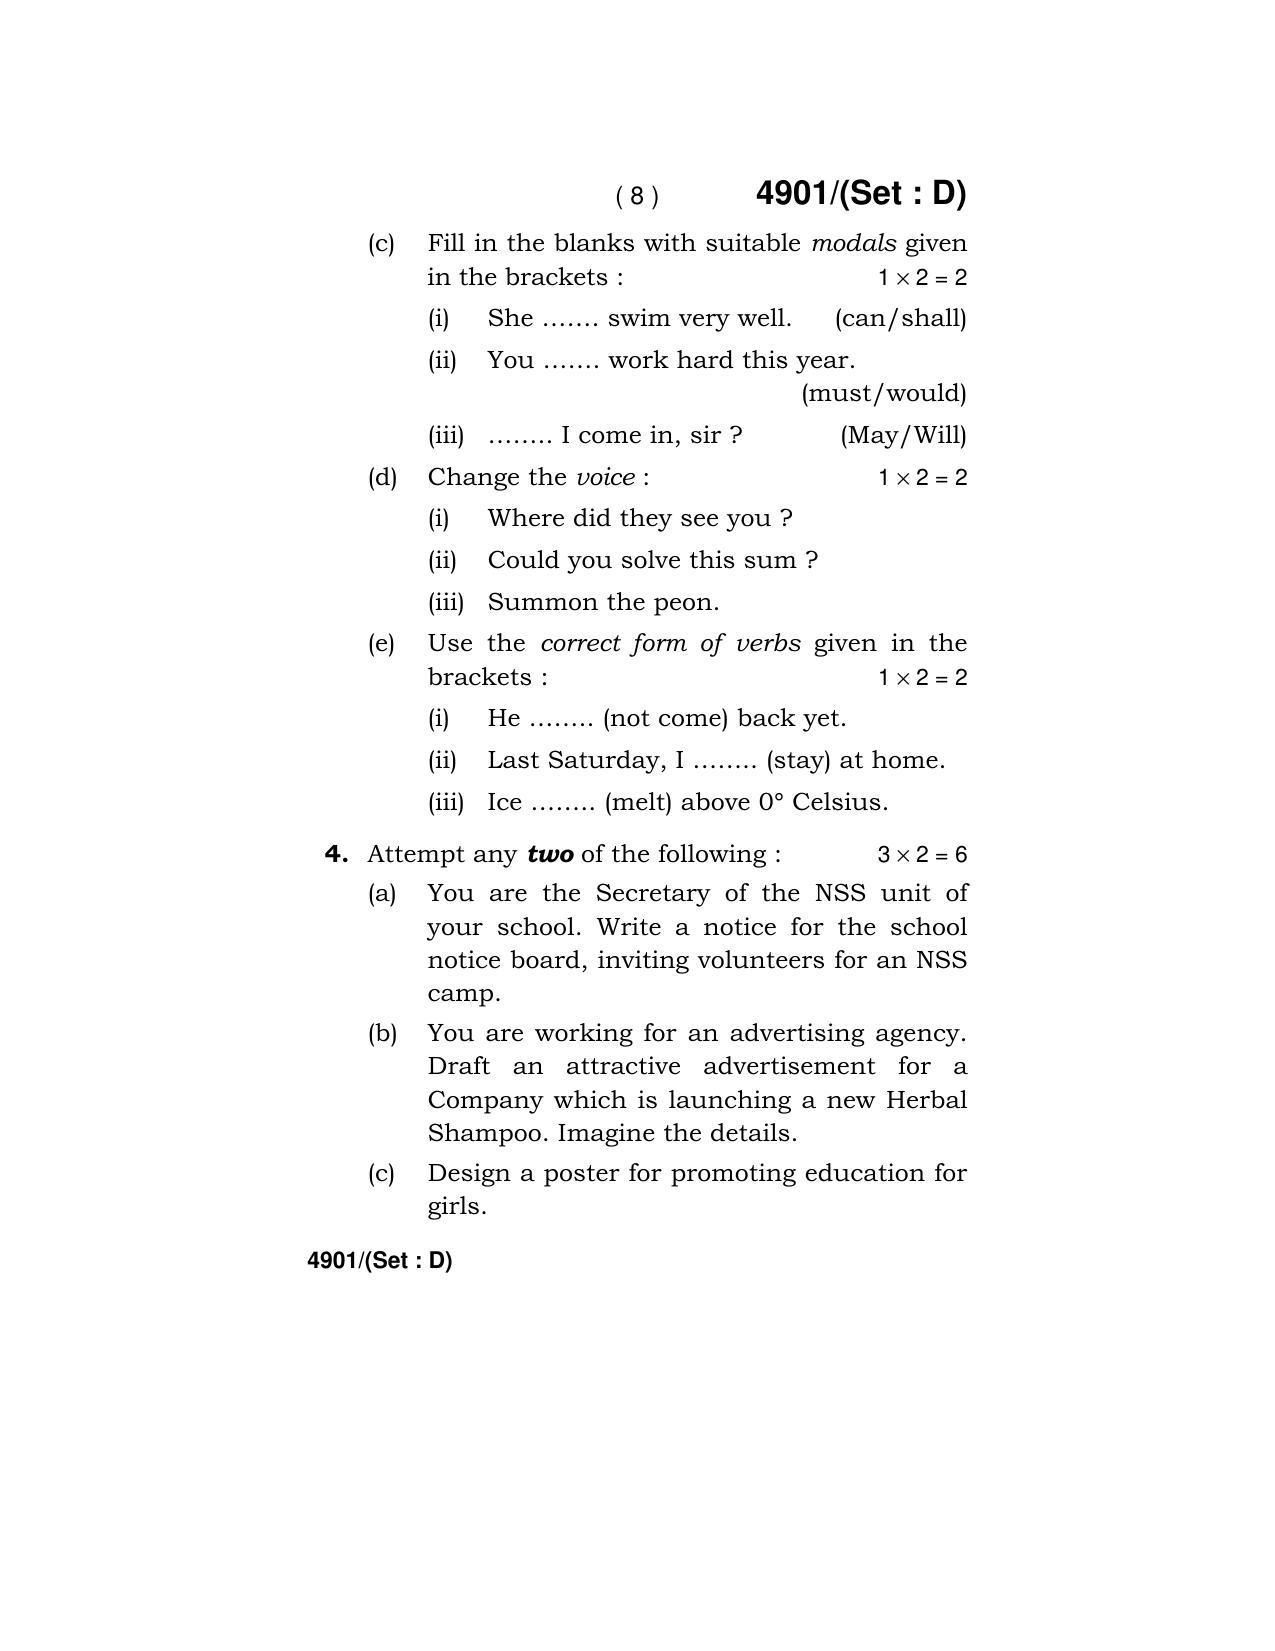 Haryana Board HBSE Class 12 English Core 2020 Question Paper - Page 56